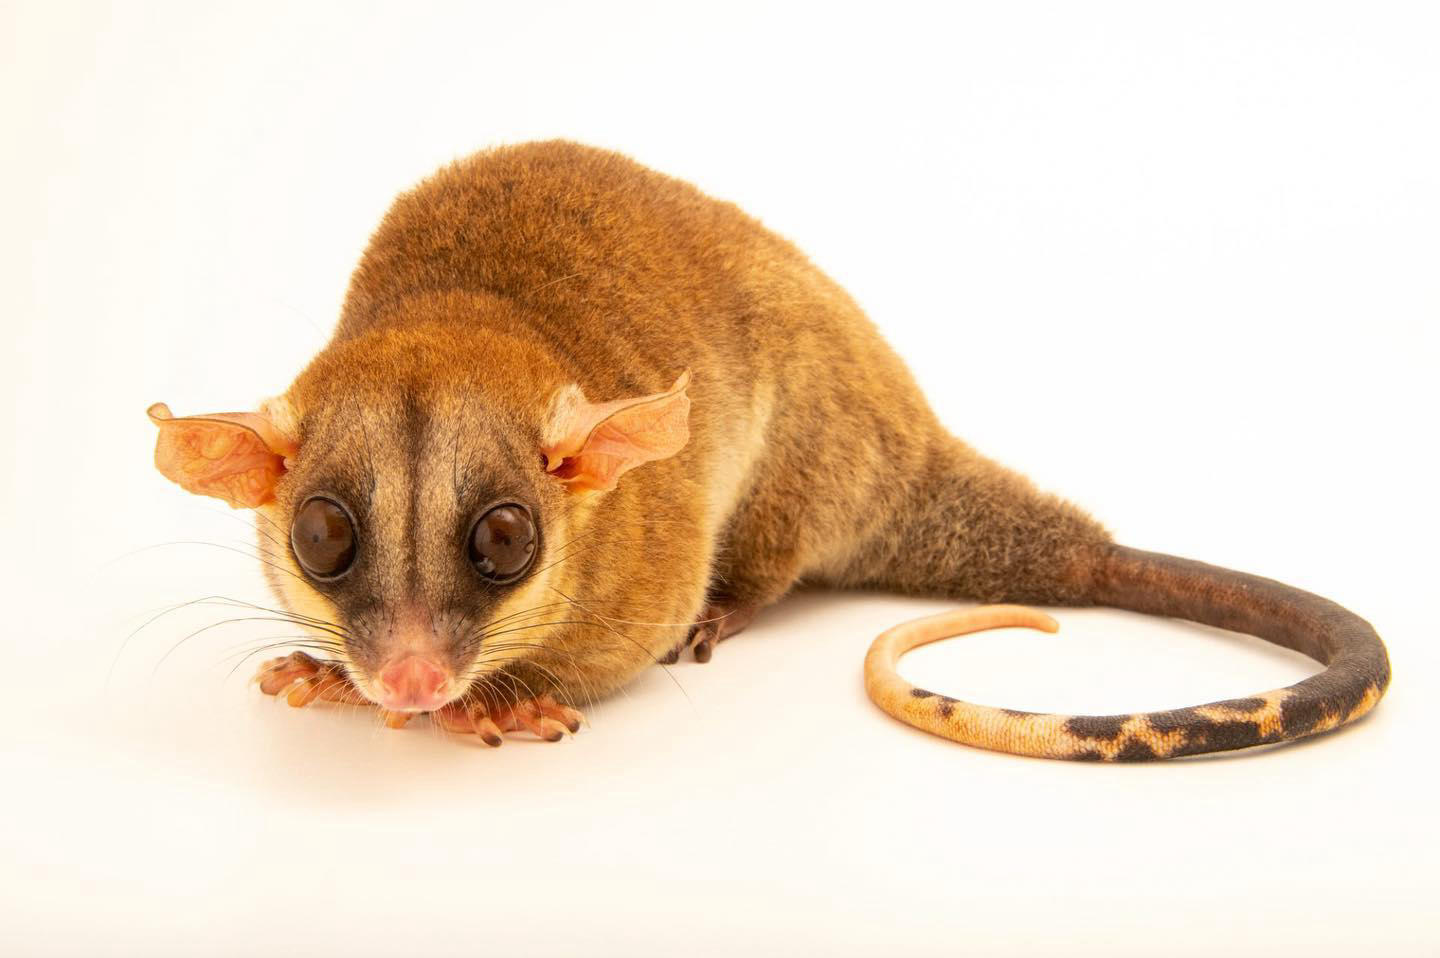 image  1 Joel Sartore- Photo Ark - Found in rainforests throughout South America, bare-tailed woolly opossums